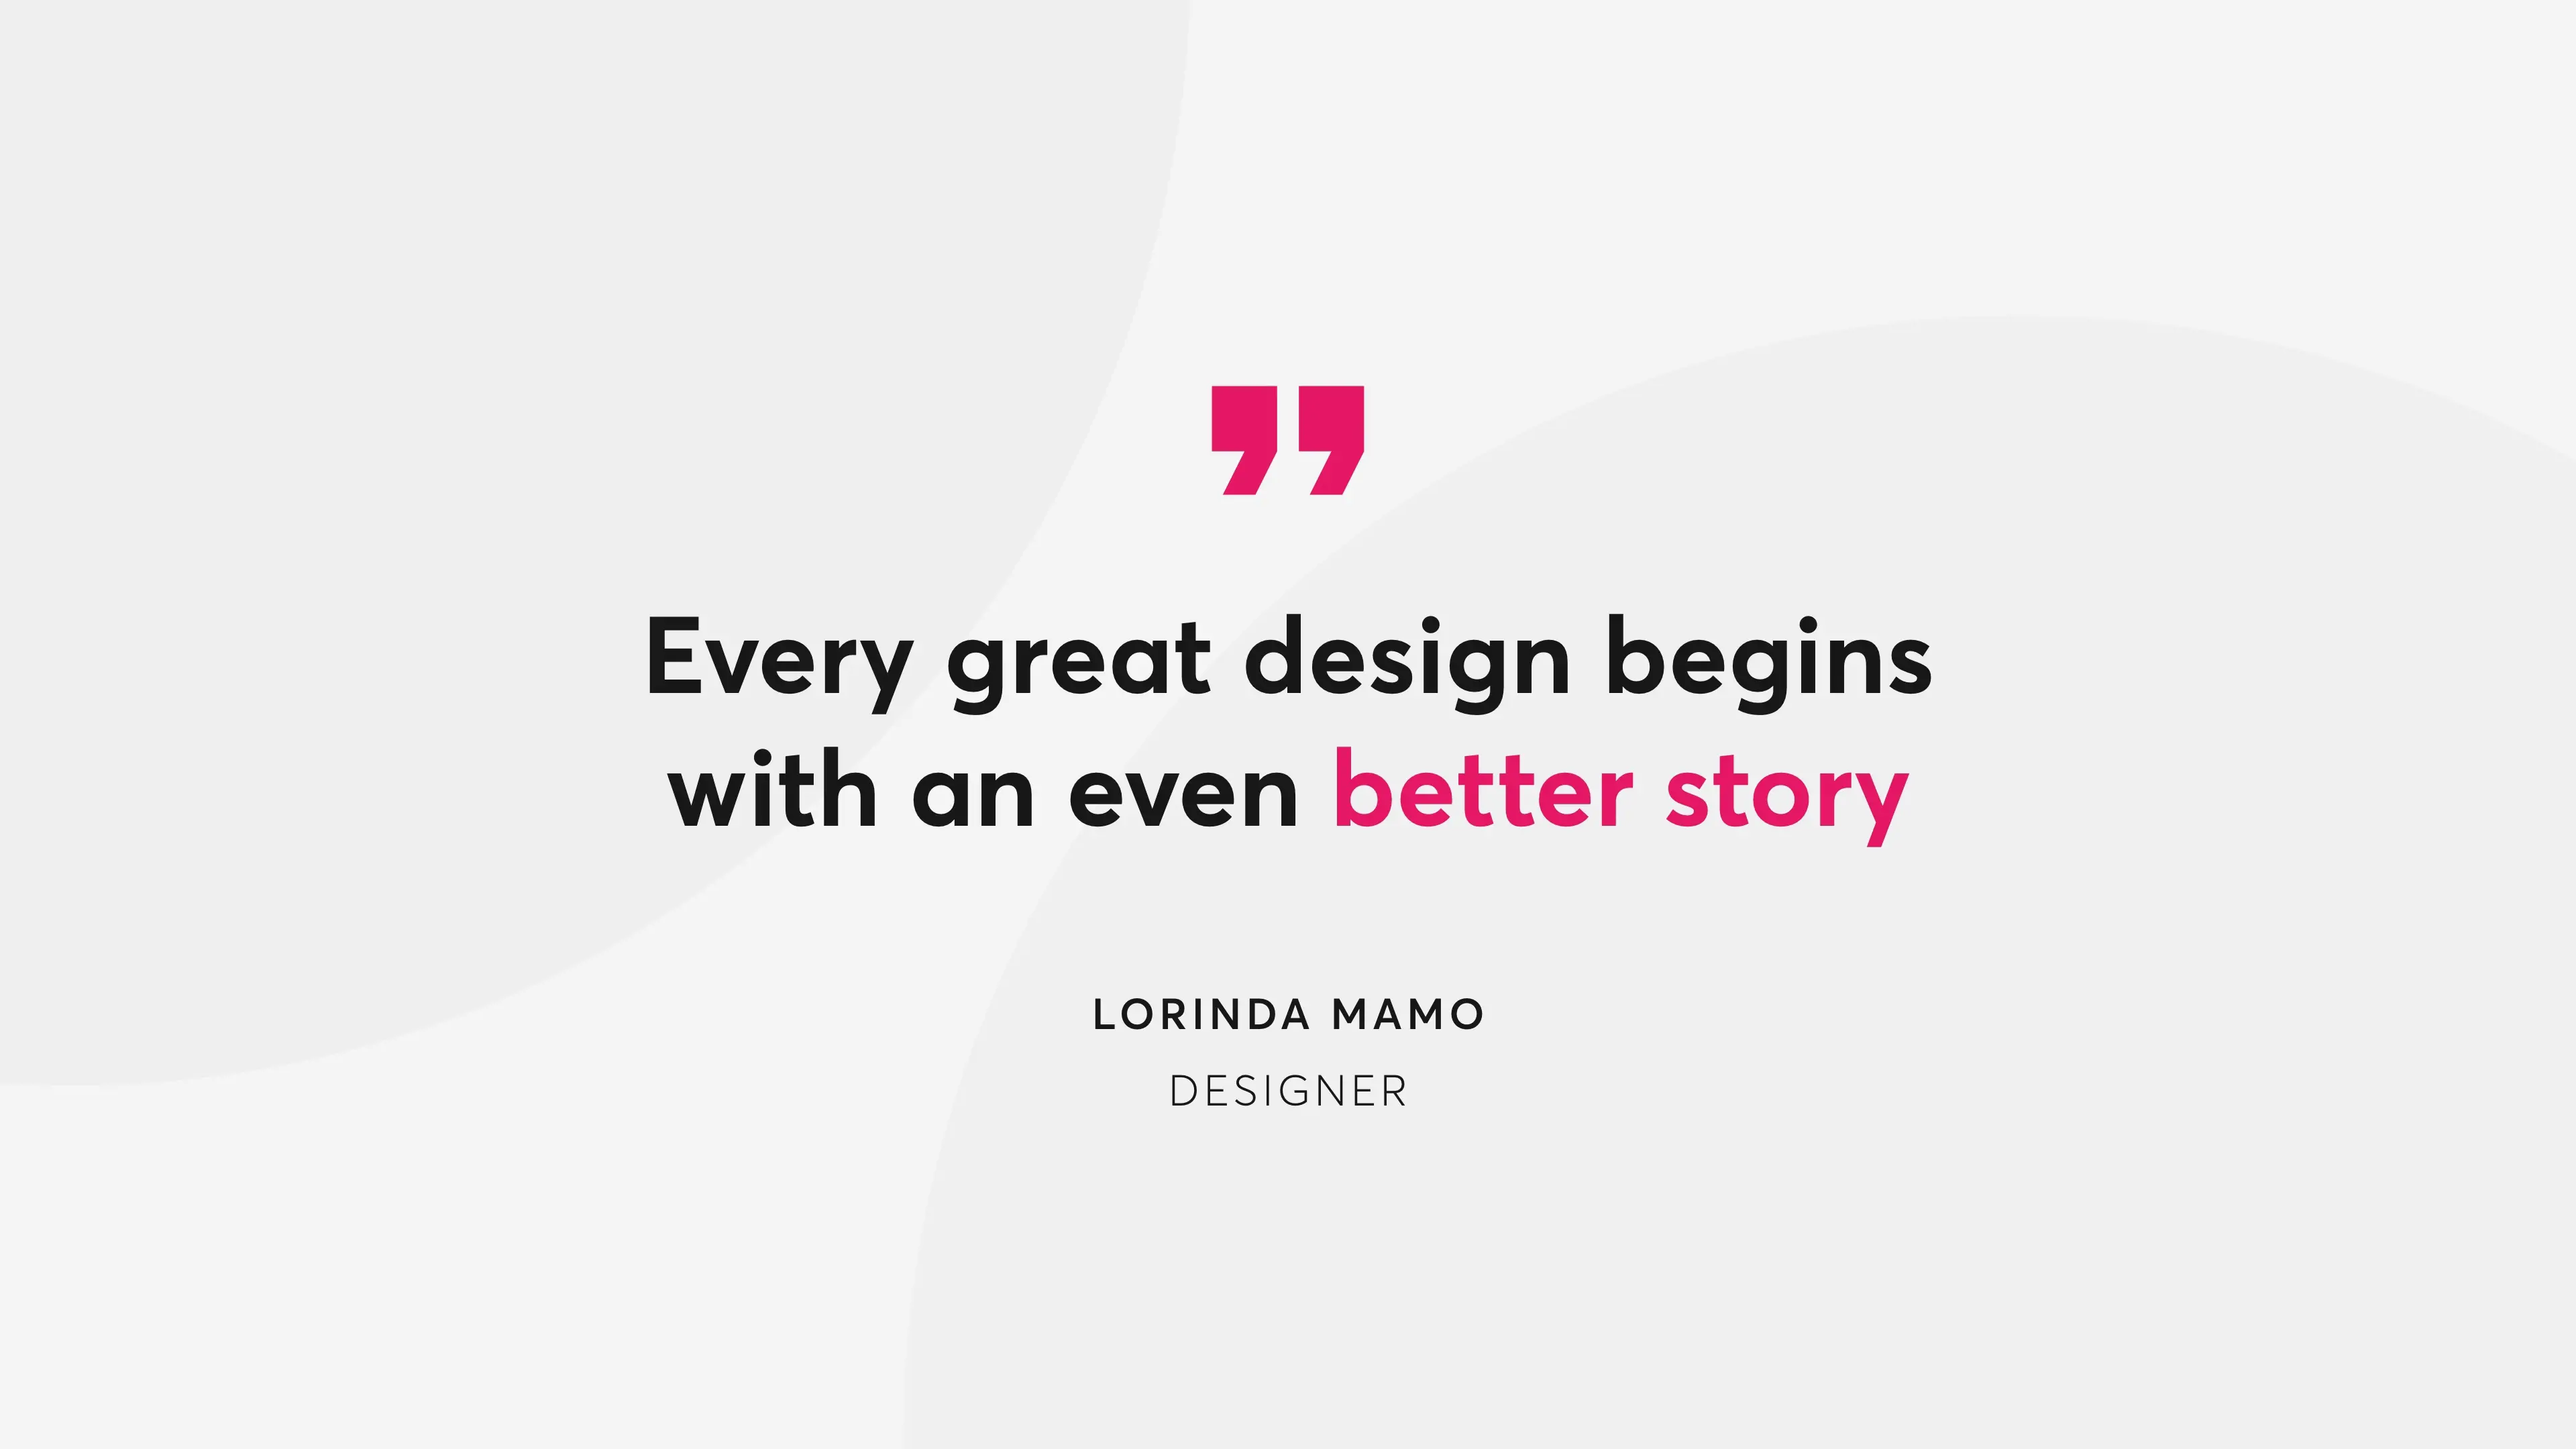 Quote by Lorinda Mamo saying "Every great design begins with an even better story"